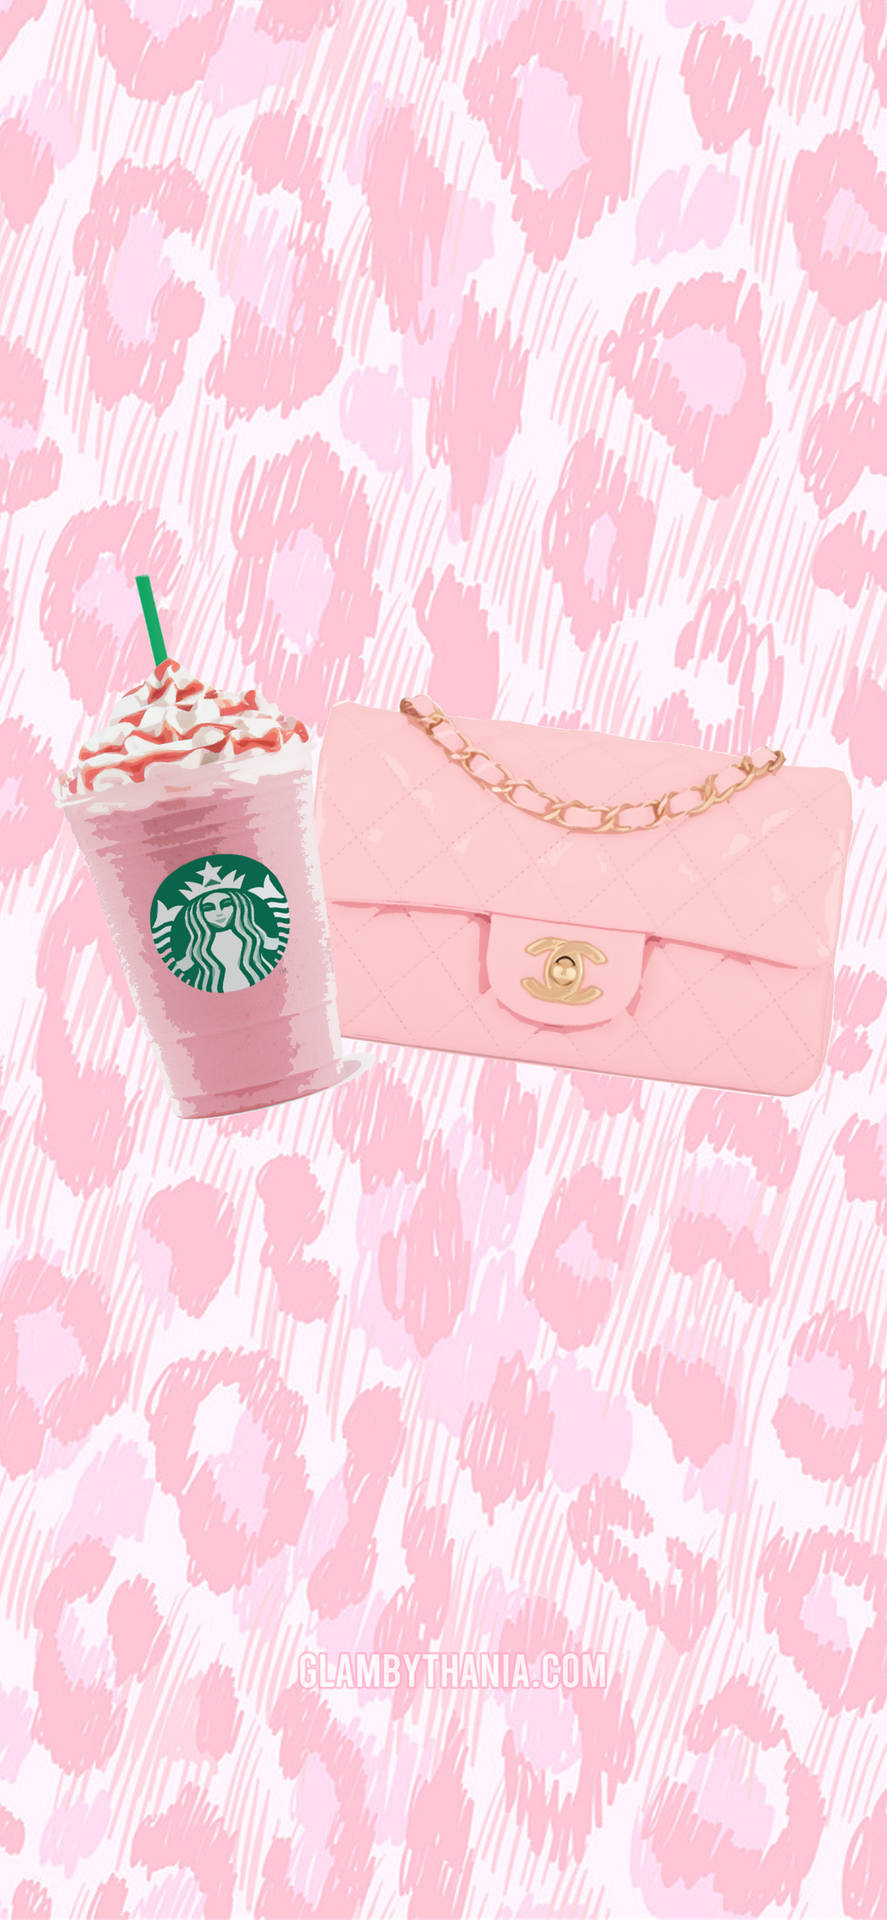 Pink Purse And Starbucks Girly Iphone